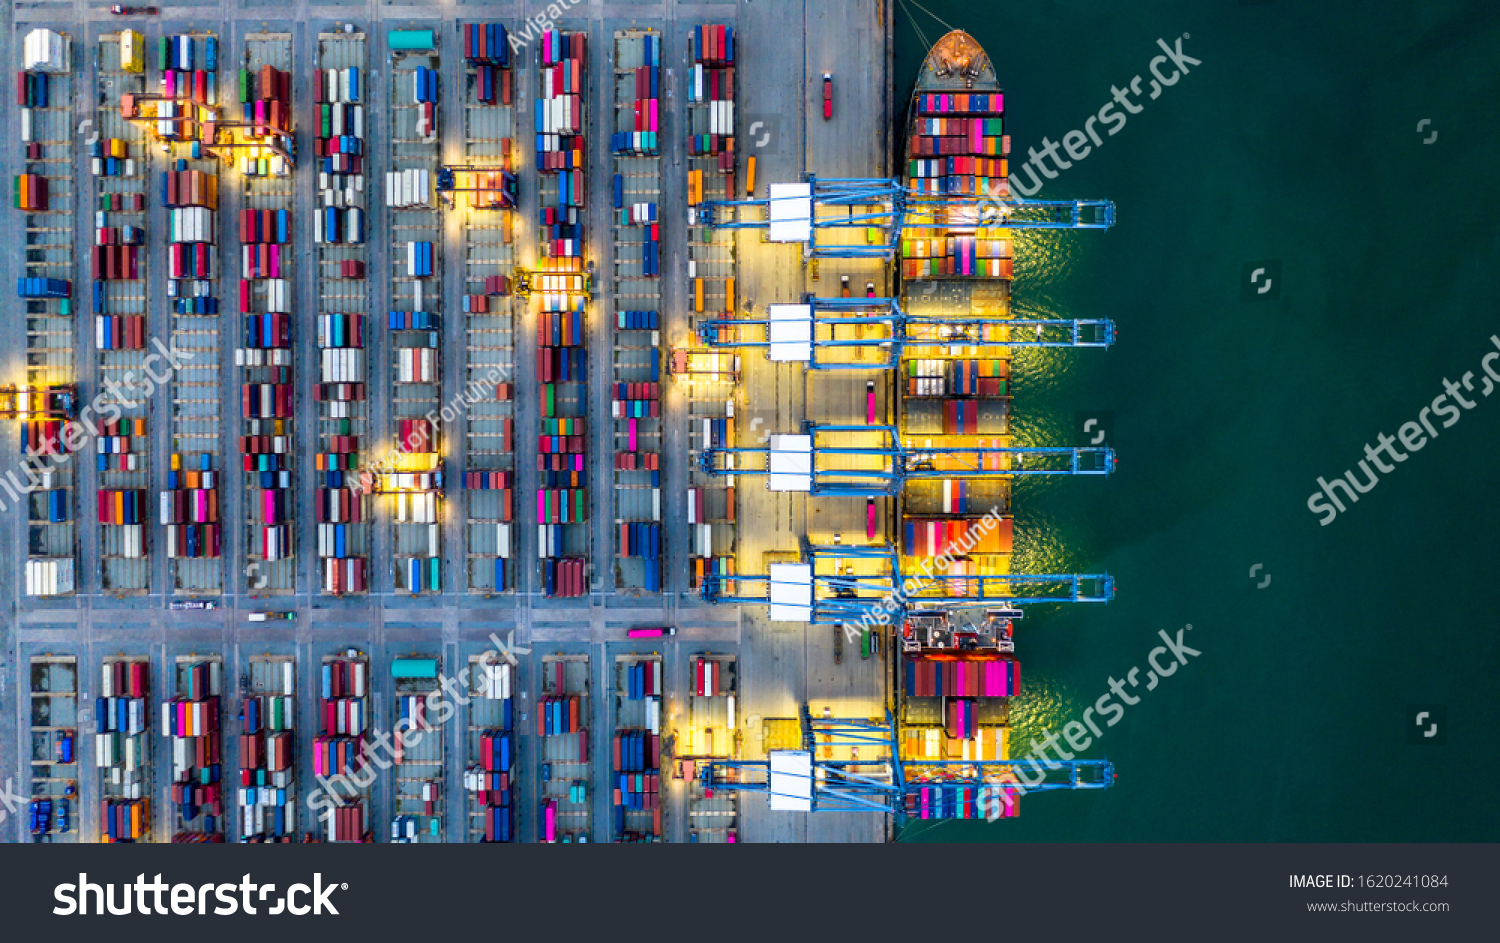 Container ship working at night, Business import export logistic and transportation of International by container ship in the open sea, Aerial view industrial crane loading cargo freight port, Dubai. #1620241084